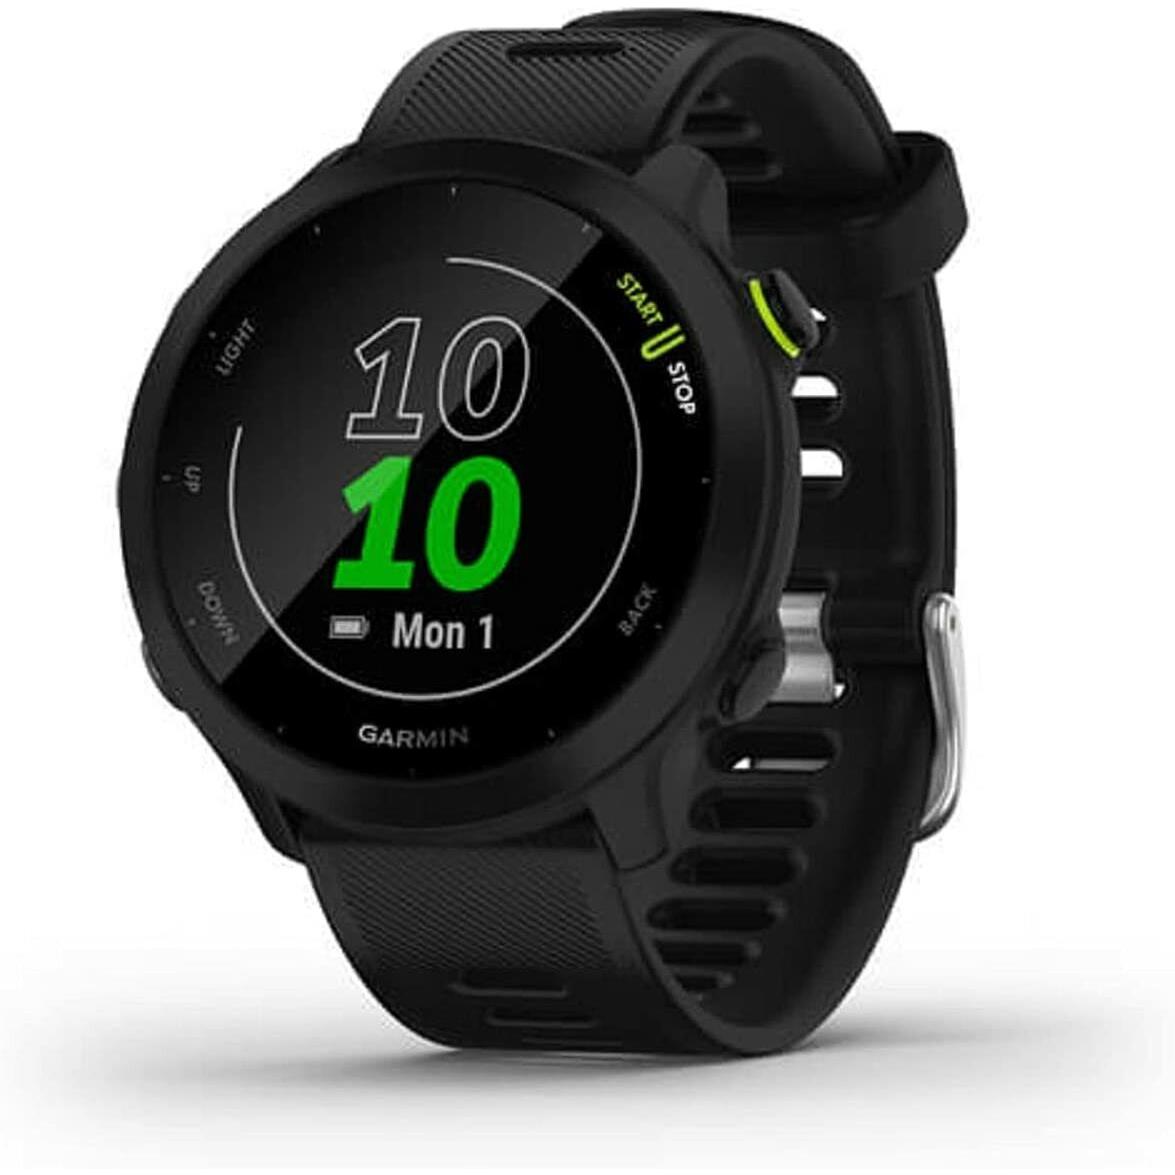 Garmin Forerunner 55 Wrist Based Gps Smartwatch Various Colors Available